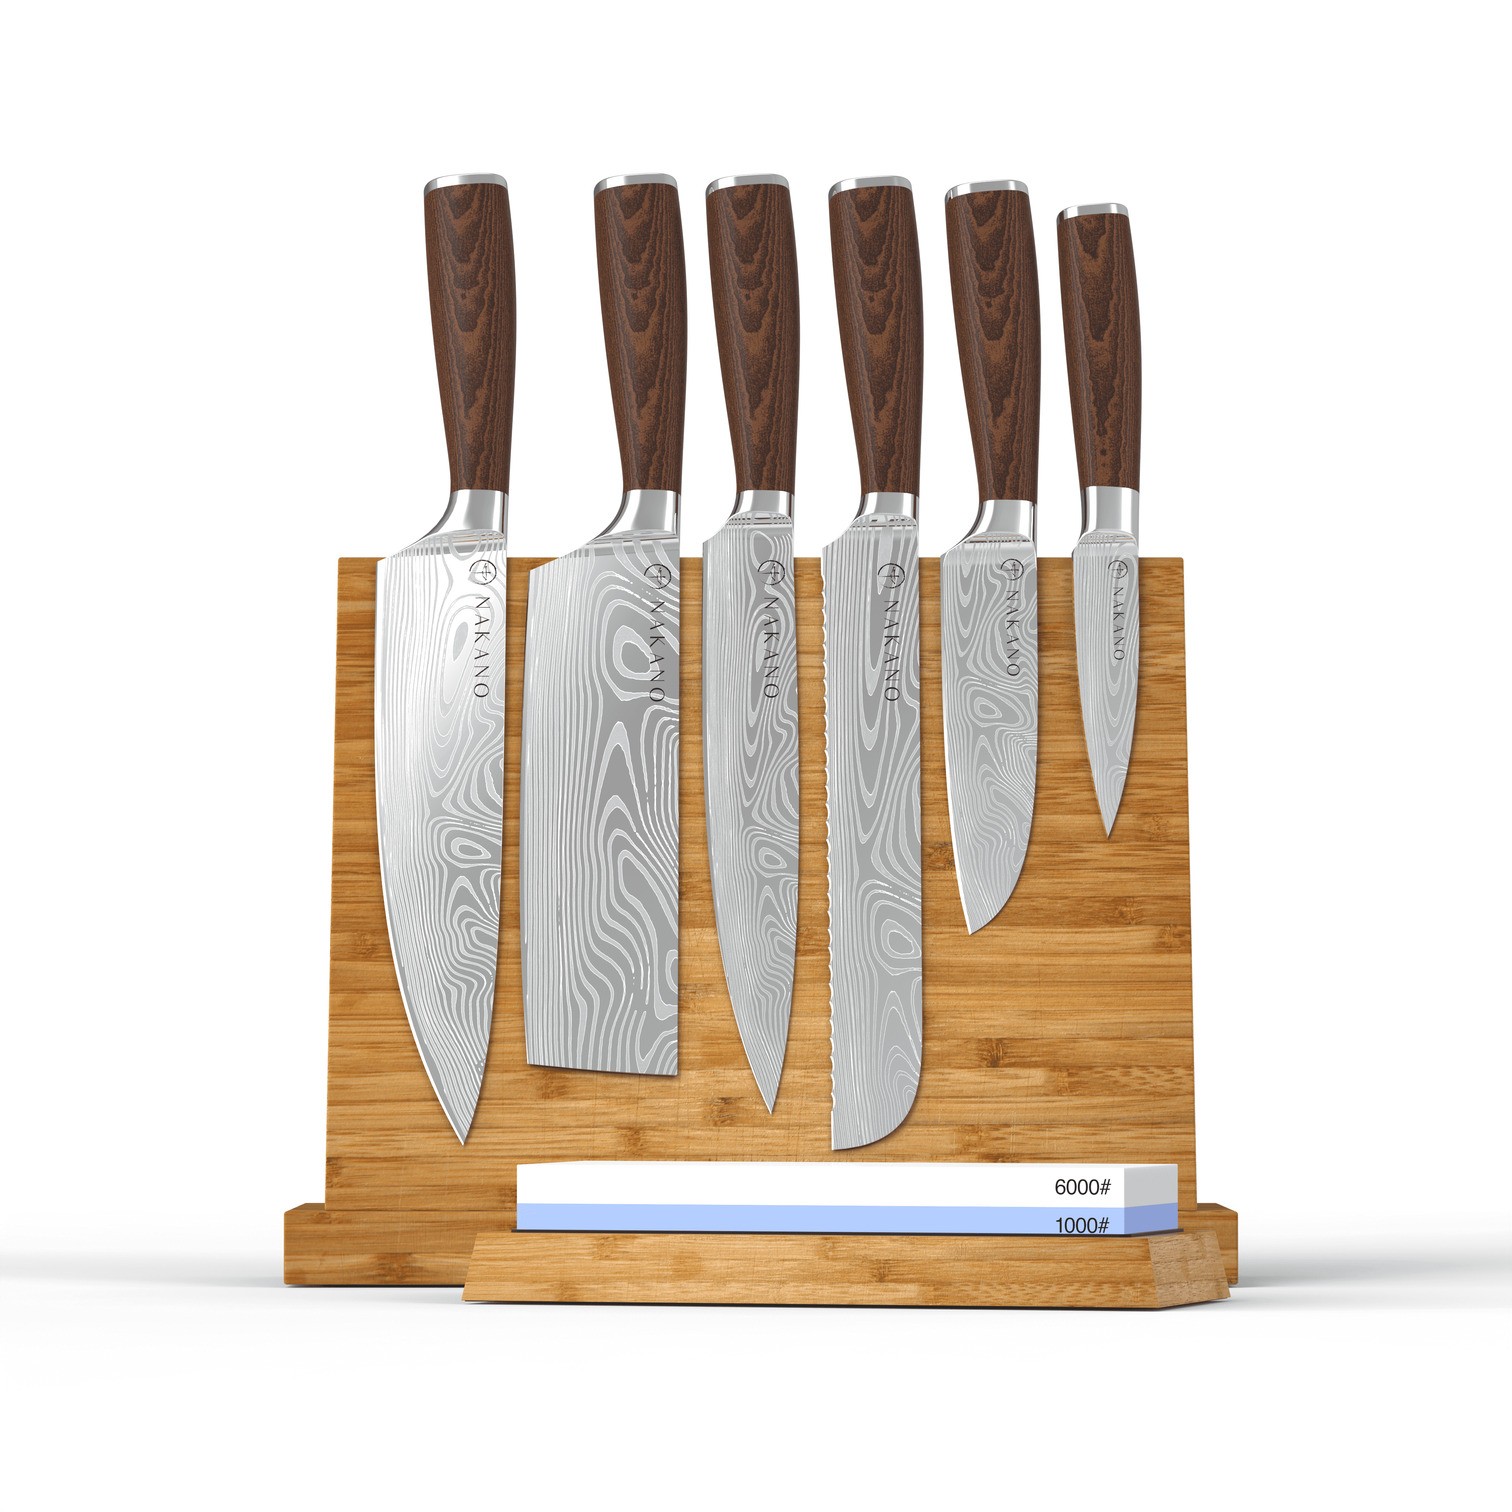 https://chophappy.com/wp-content/uploads/2022/01/NAKANO_MAGNETIC_KNIFE_STAND_CHEFKNIFE.720_2_1_1512x.jpg